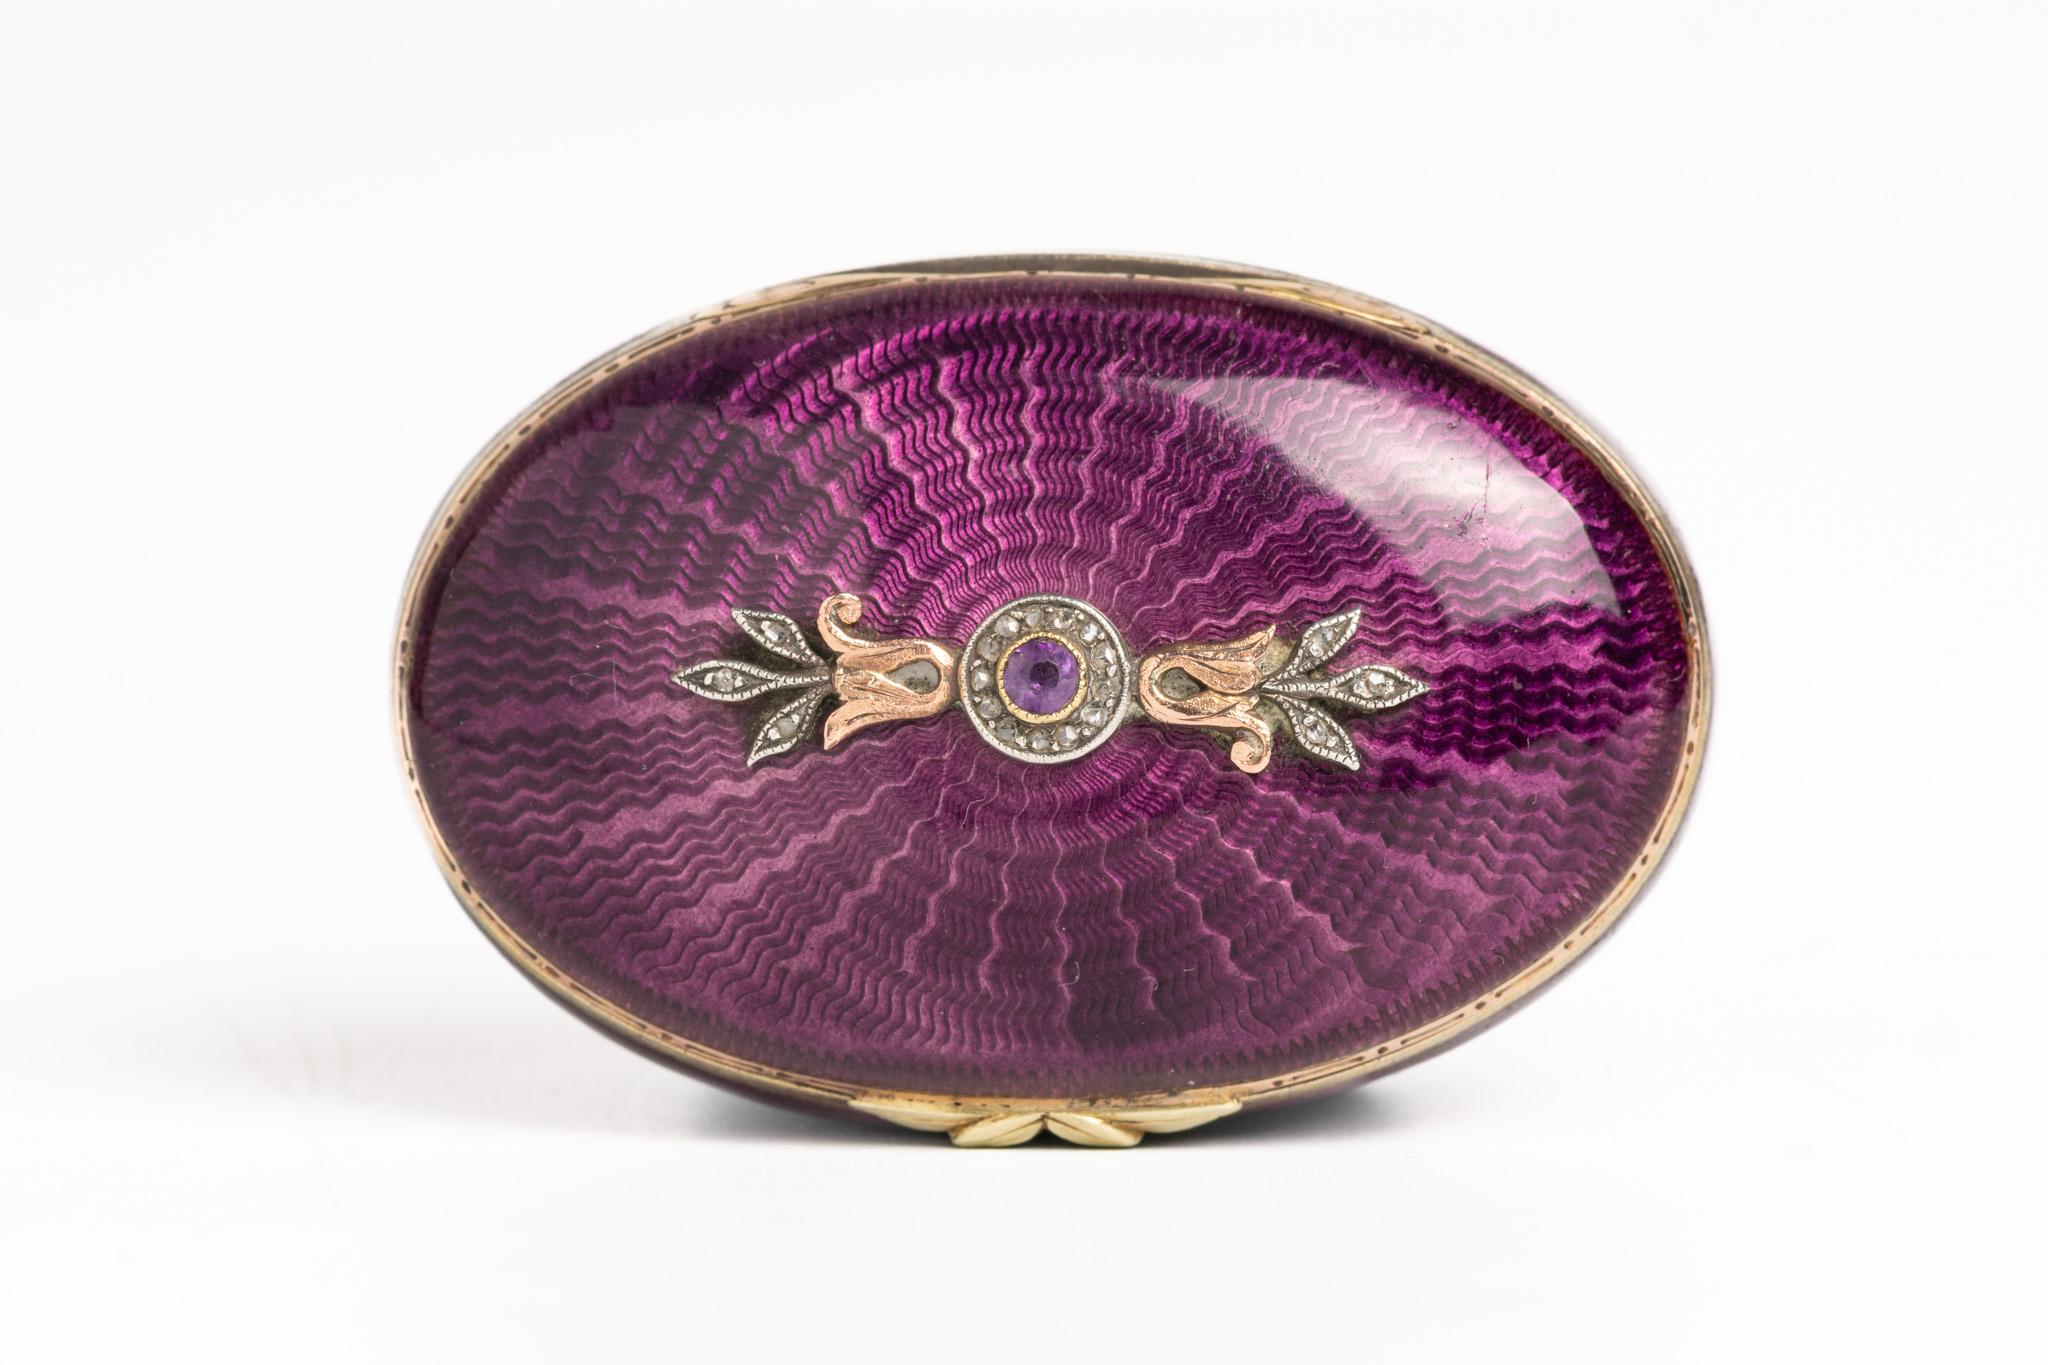 This very rare and magnificent purple guilloché enamel and silver gilt pill box is dated circa the 1920s. It's the finest guilloche enamel box we've seen so far. We also believe the origins are Austrian or French. This extraordinary piece represents